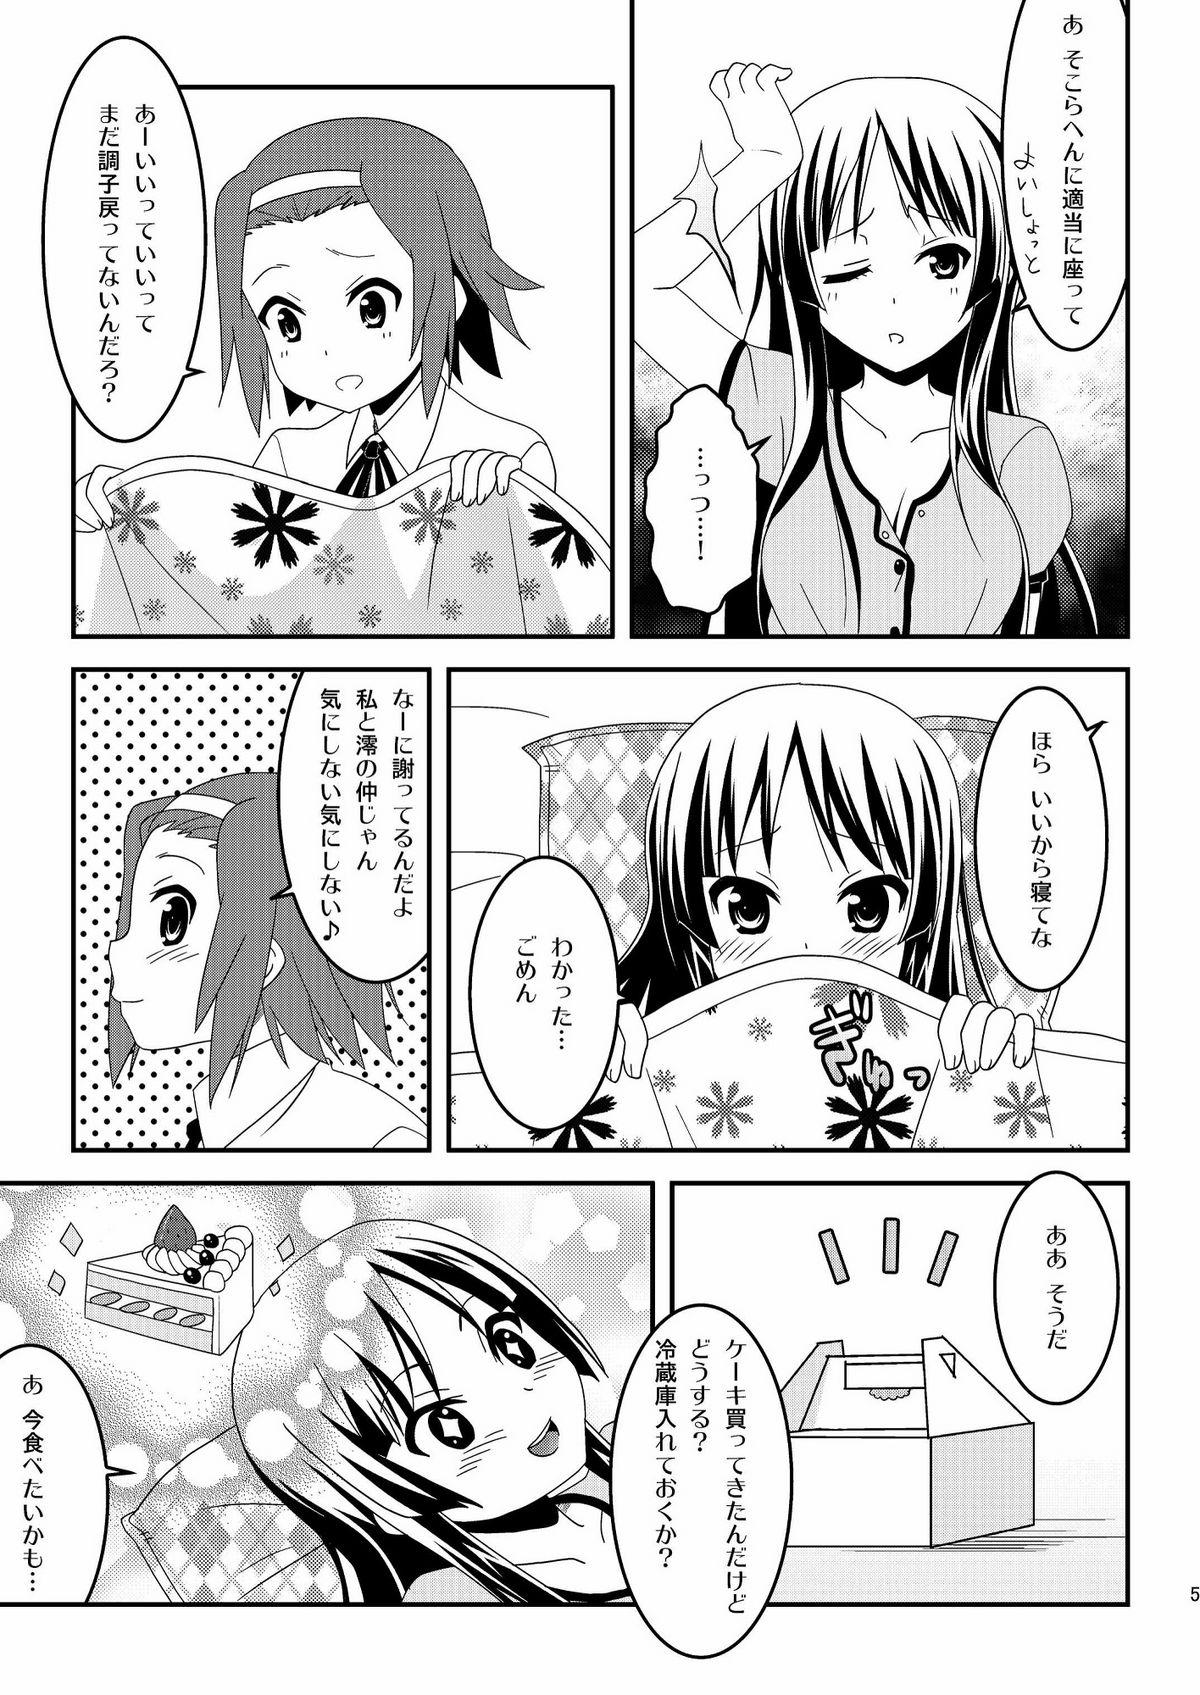 Short Sweet Sweet - K-on Made - Page 5